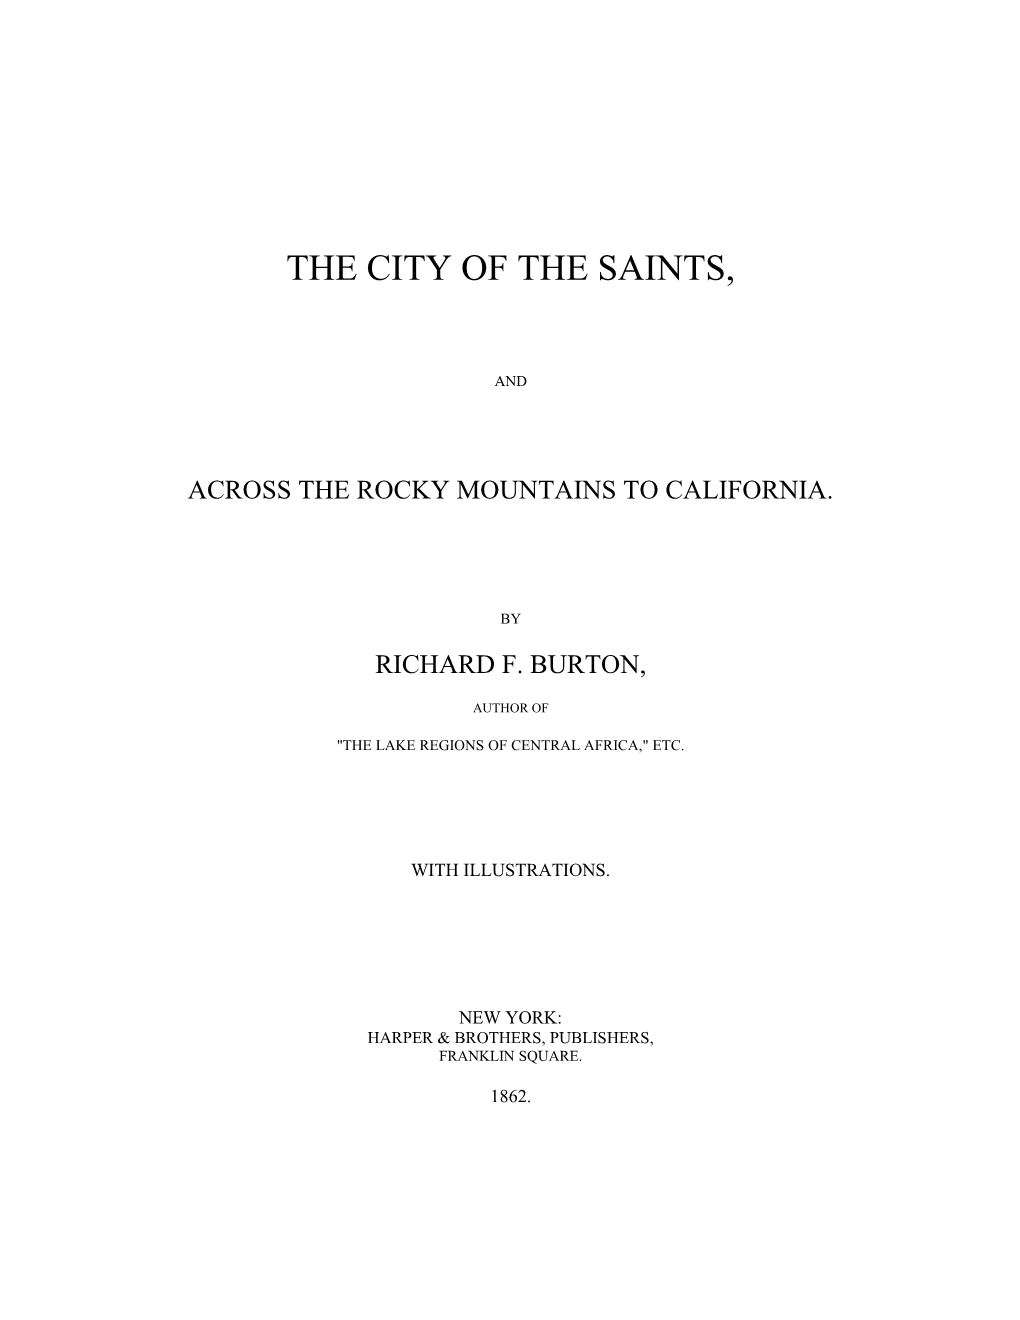 The City of the Saints